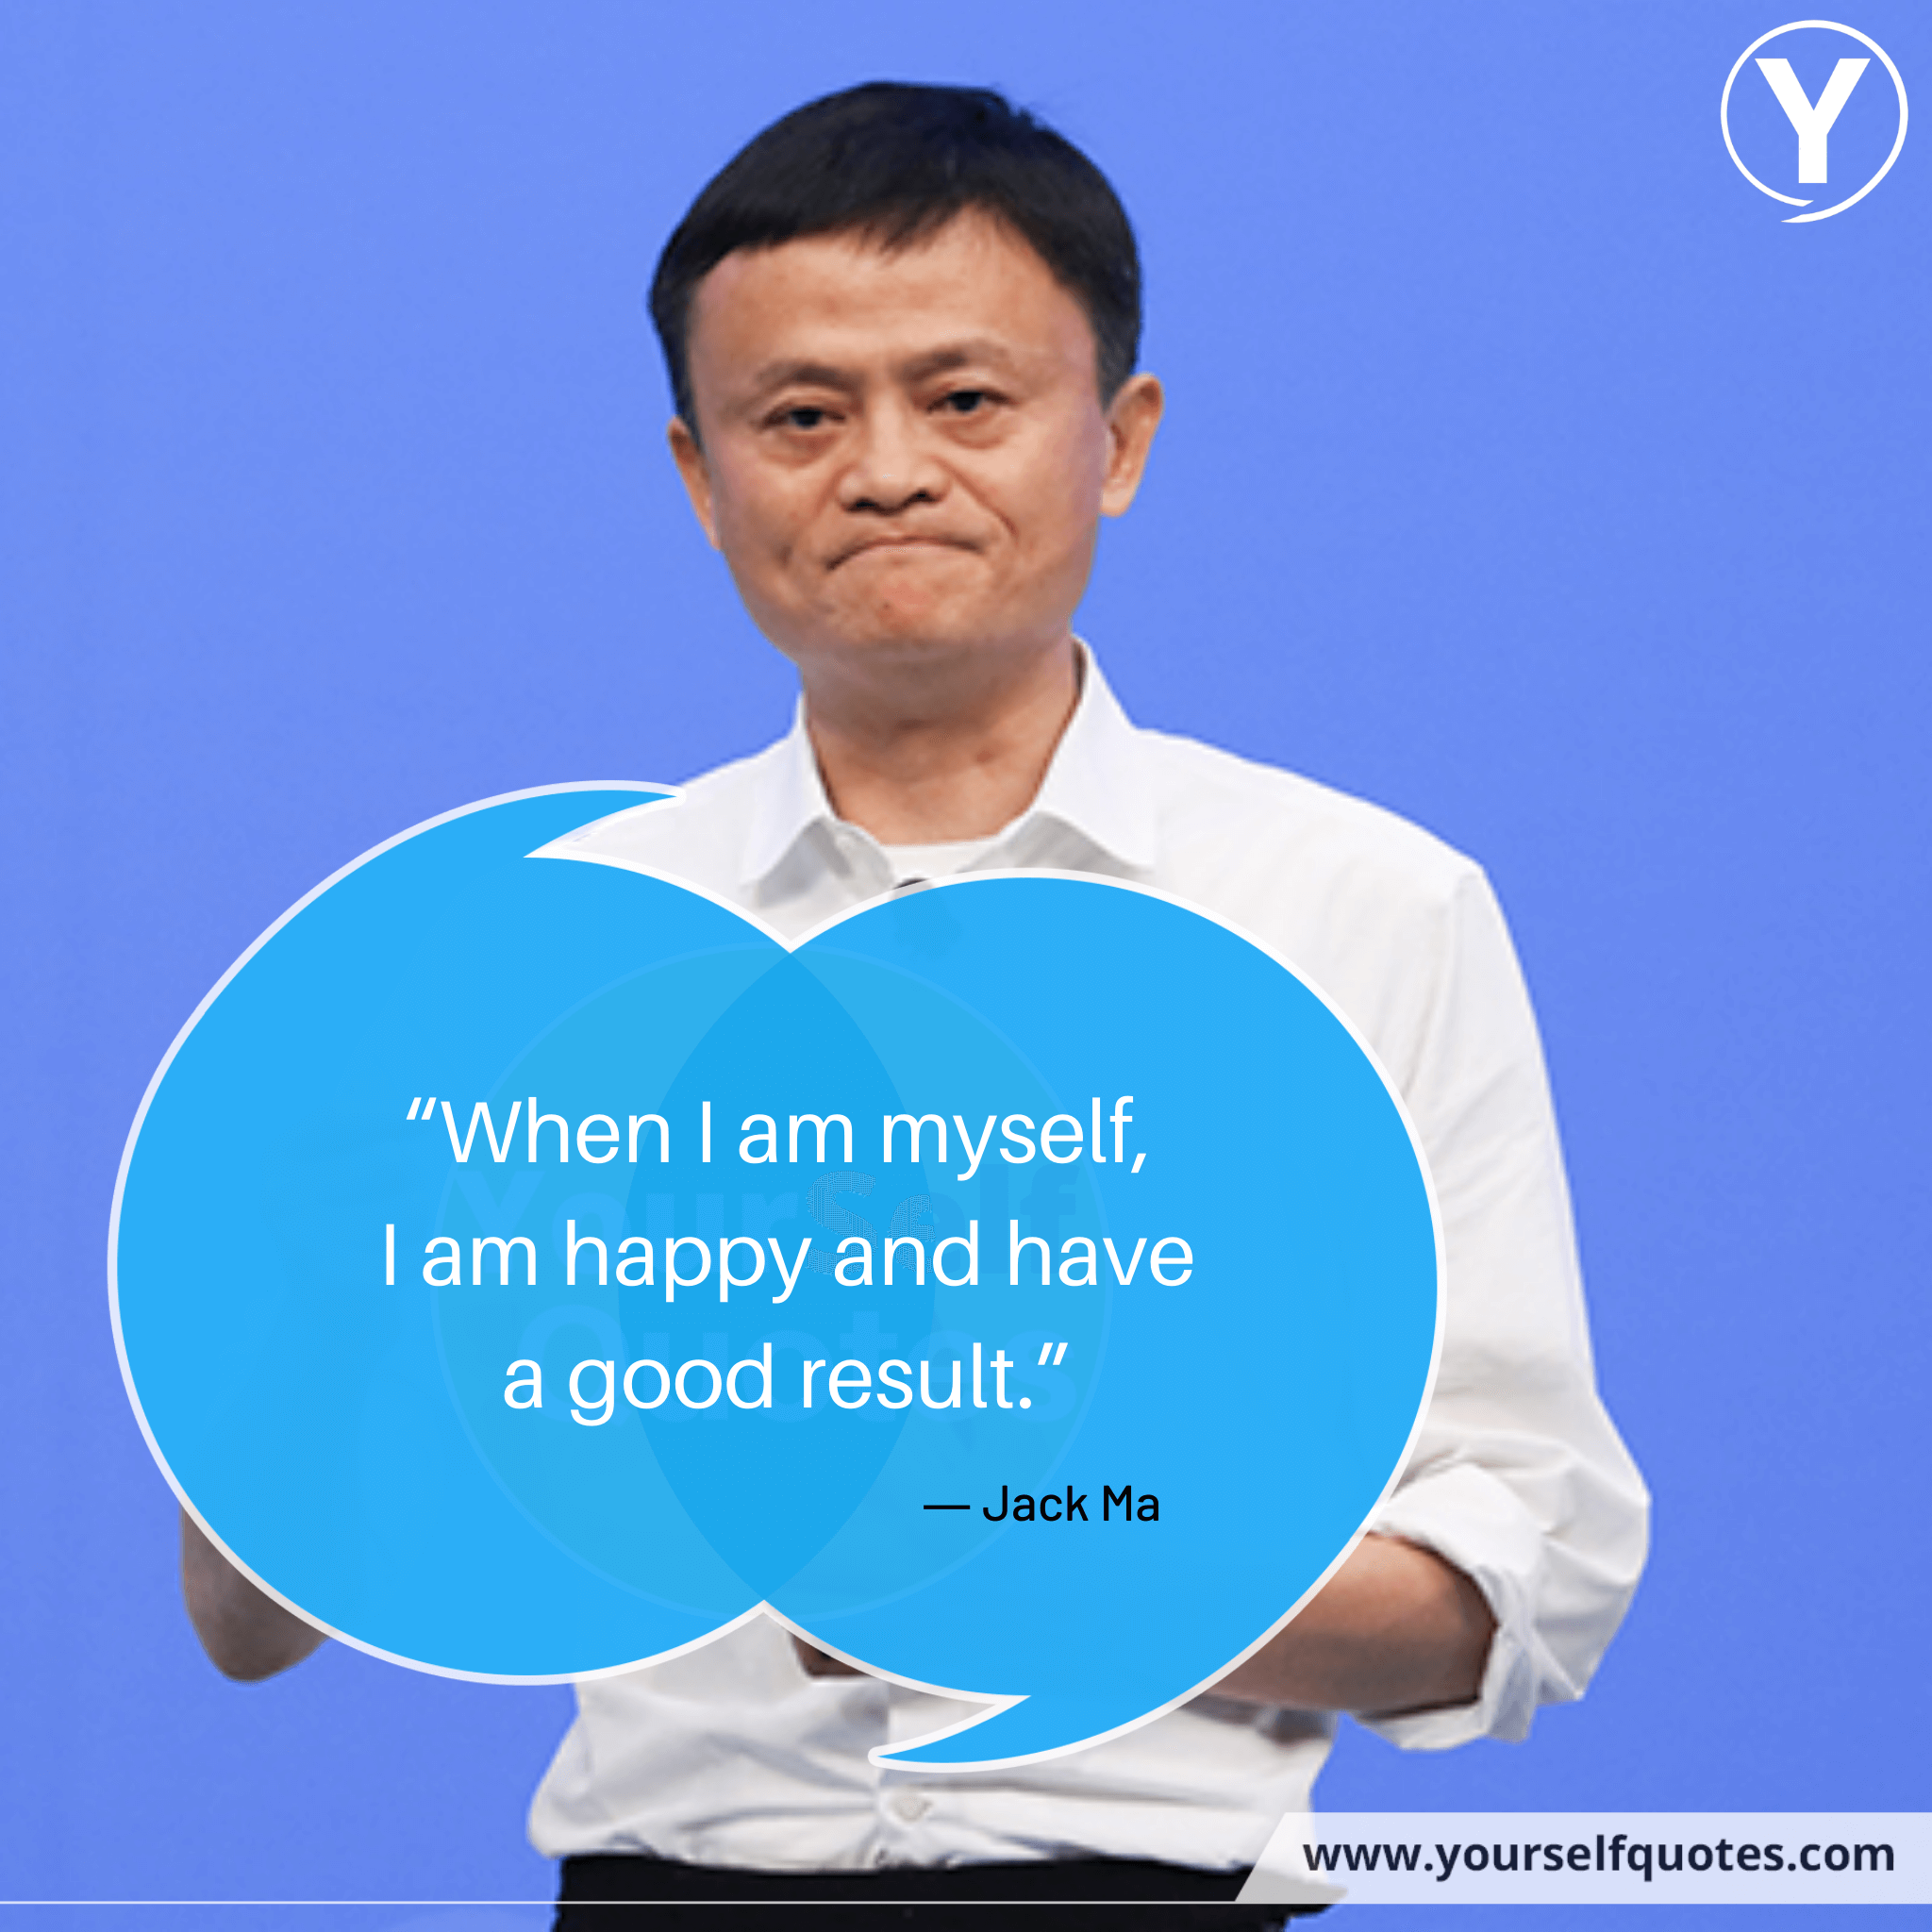 Jack Ma Most Inspiring Quotes